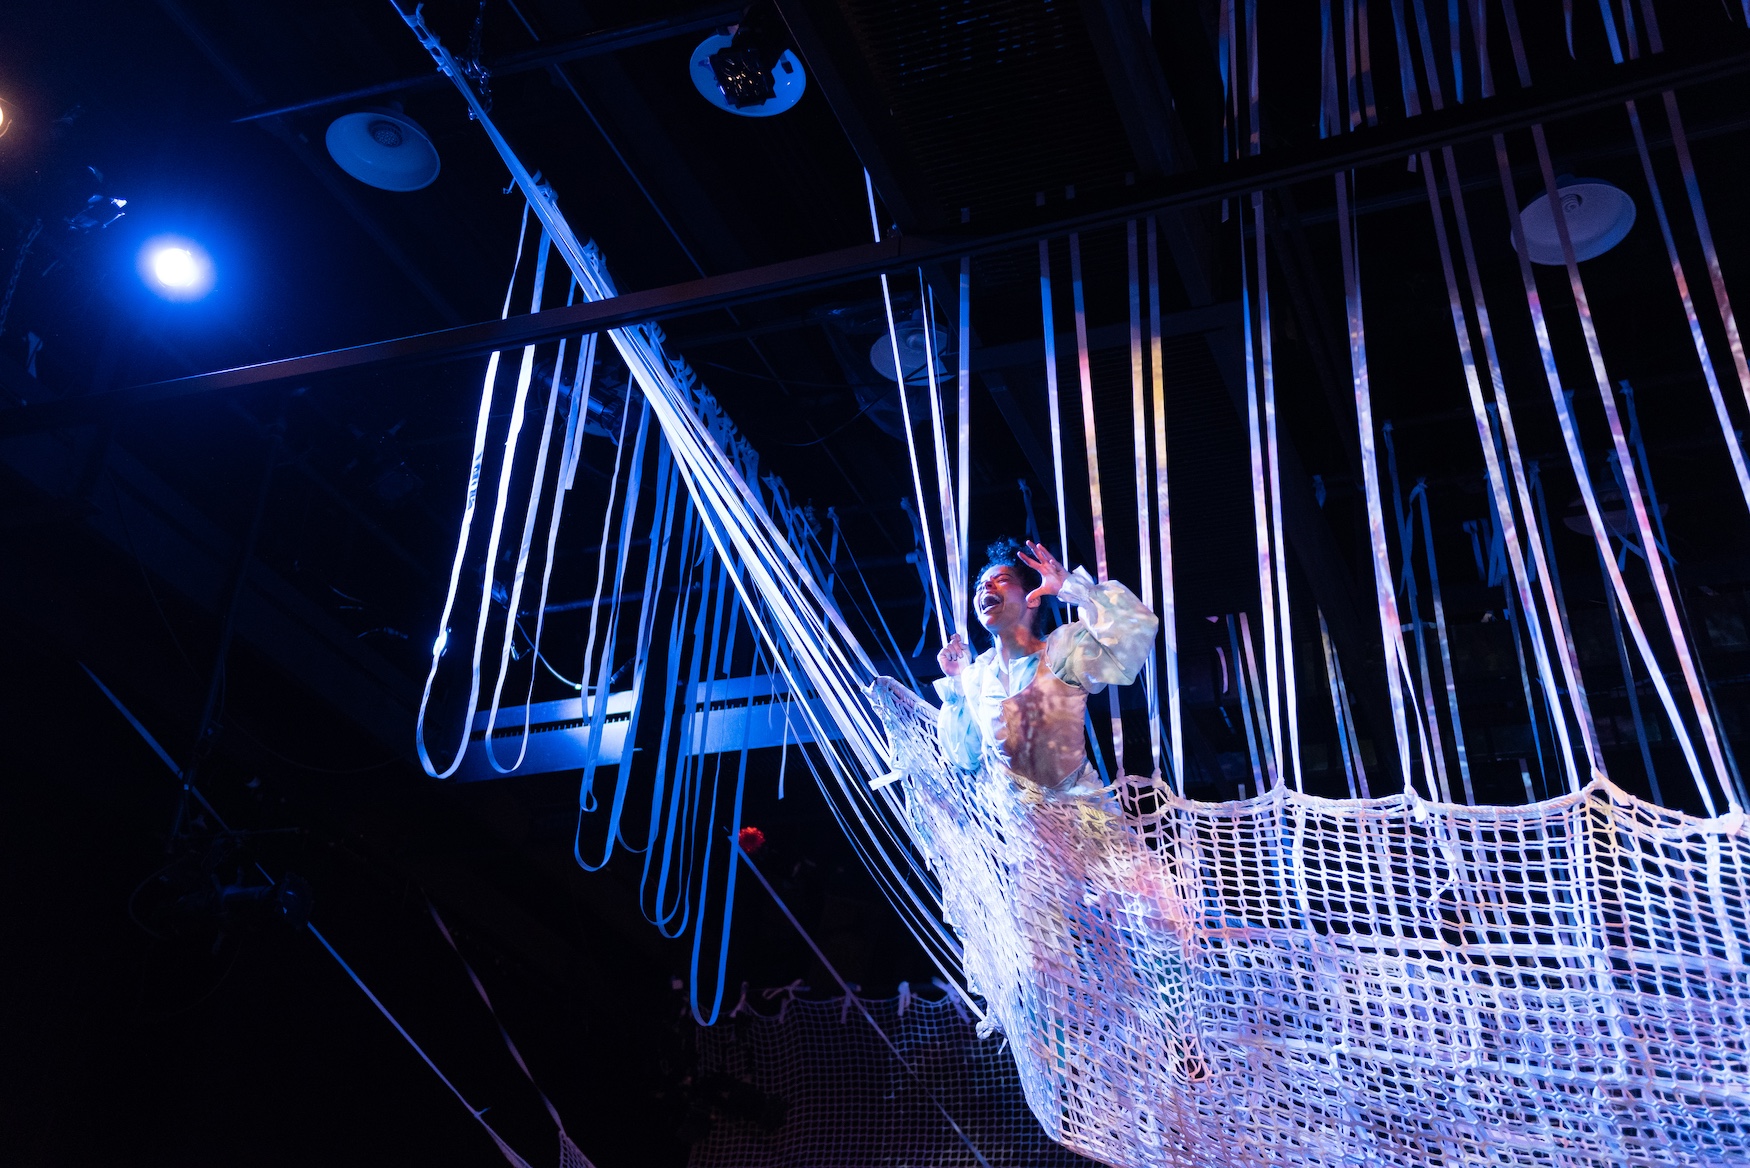 An actress suspended in webbing above stage